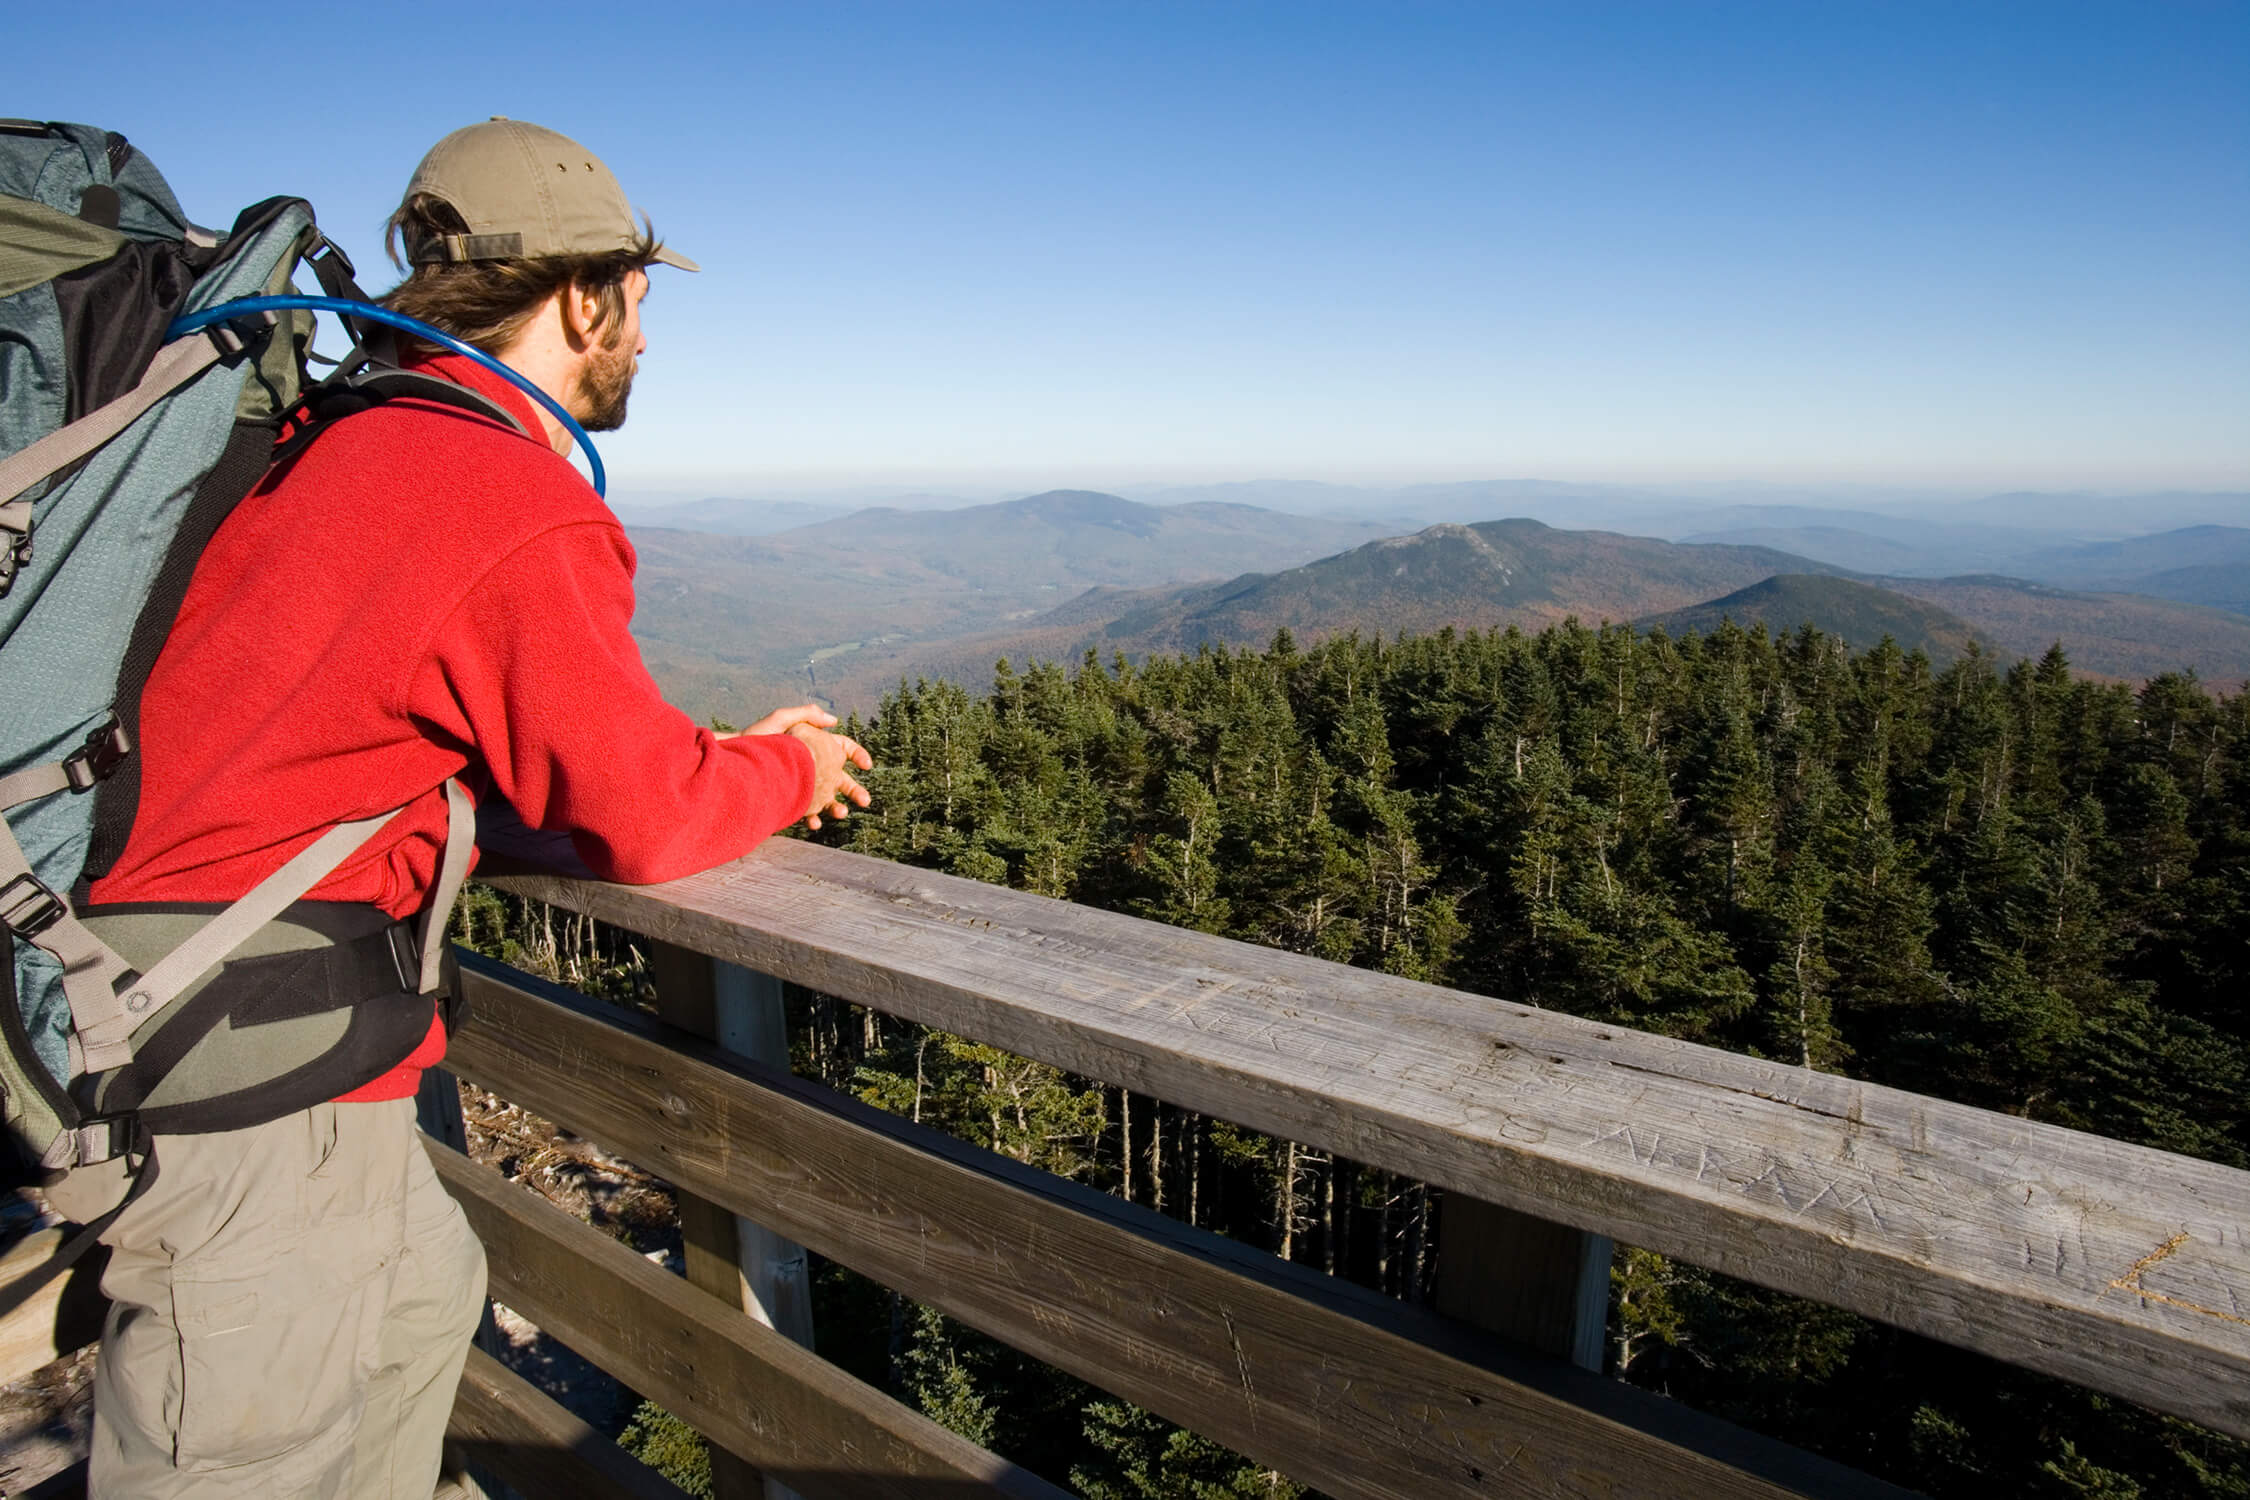 A man with a backpack on a railing overlooking a mountain.